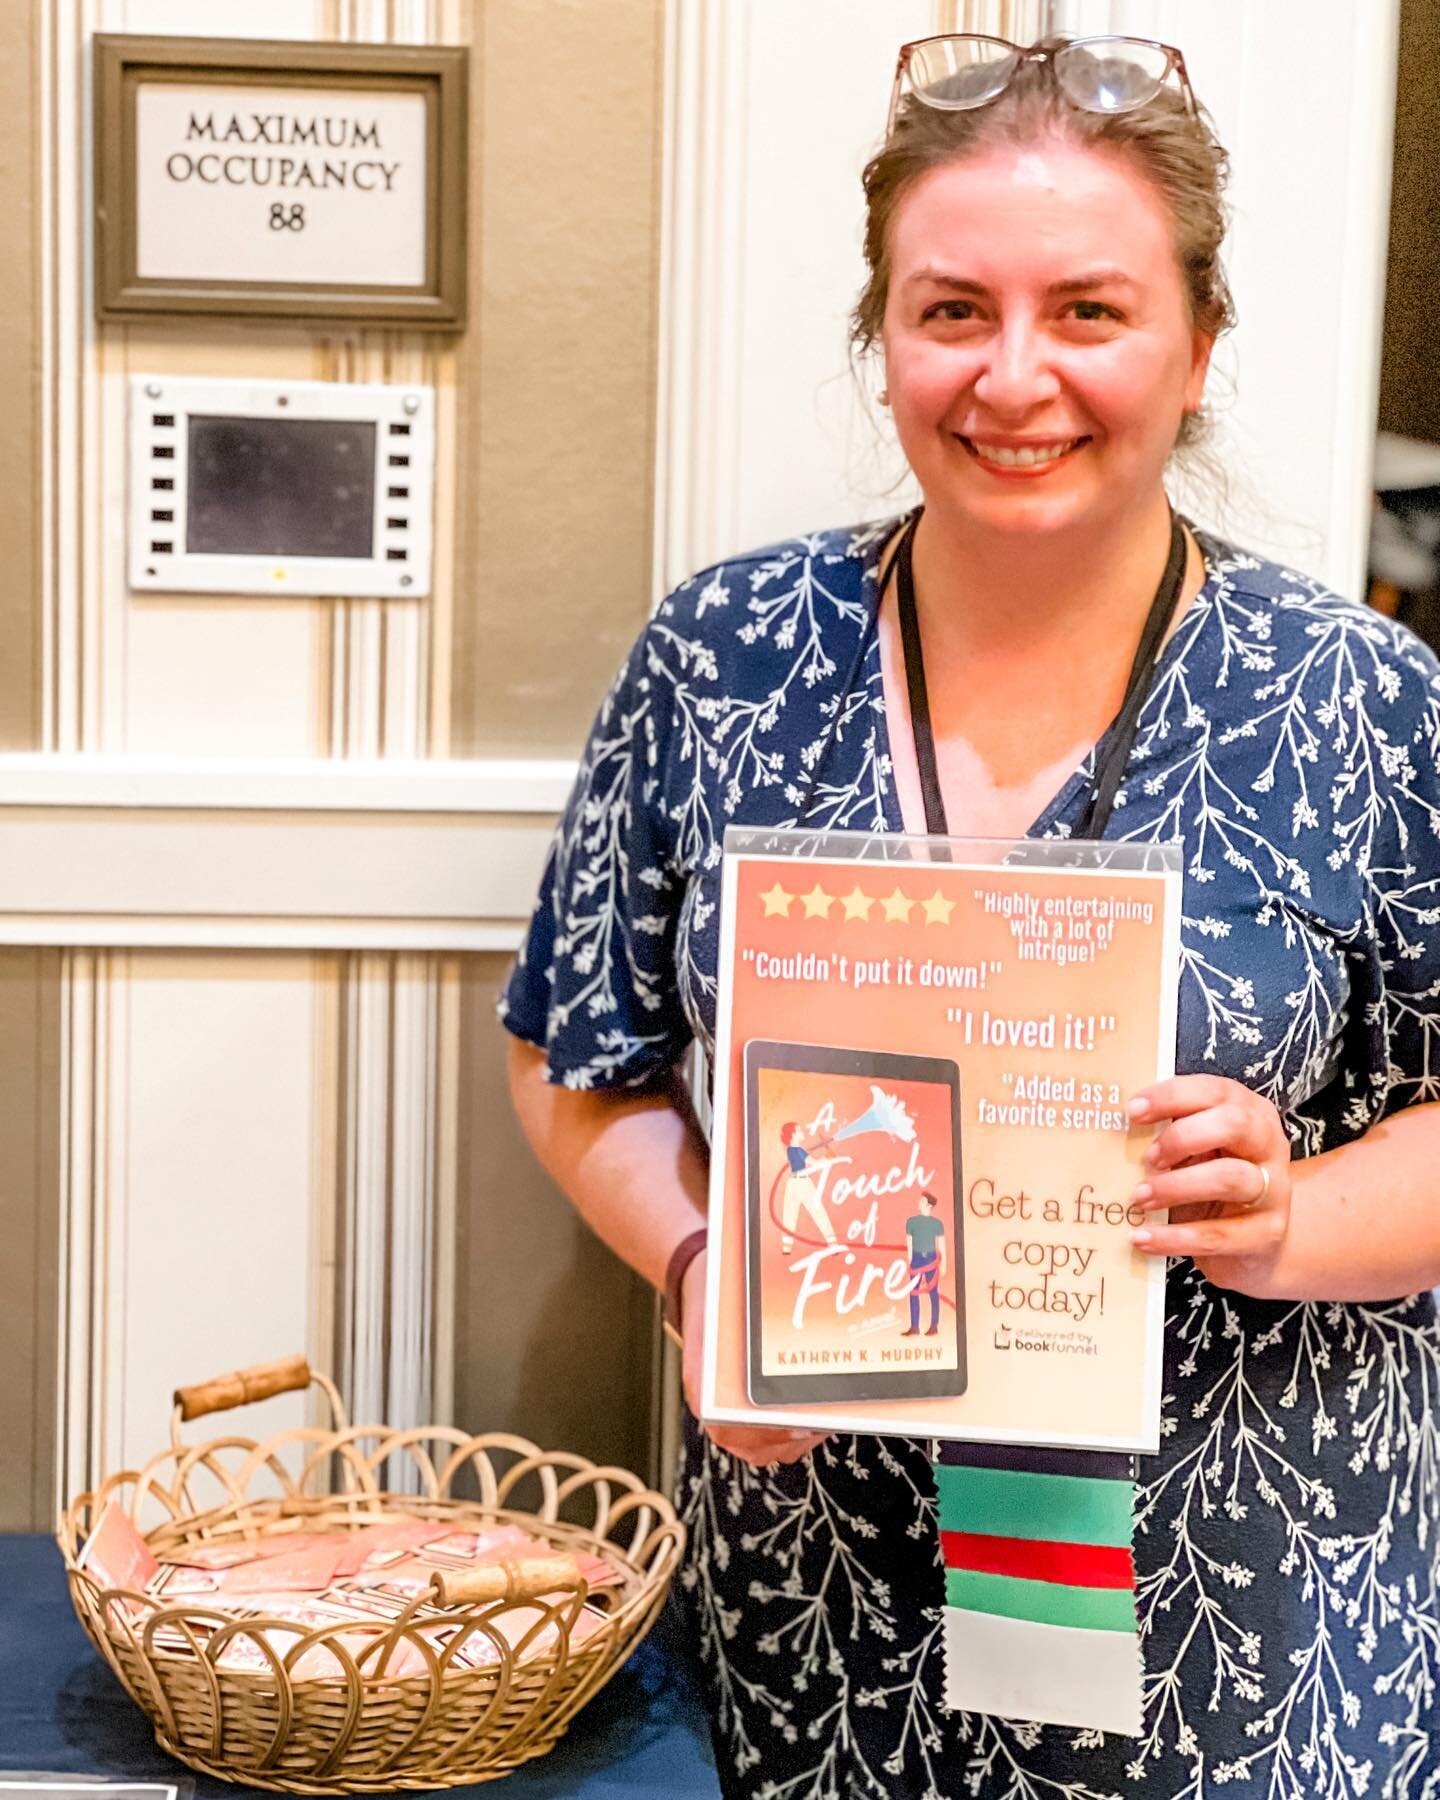 Three years ago, I attended my first @romancewriters conference to get tips for publishing my first novel. Today, I&rsquo;m giving away 500 copies of my fourth novel, A Touch of Fire! 🔥🤗🥰 #rwaconference2022 #romancebooks #romancenovels #romancewri